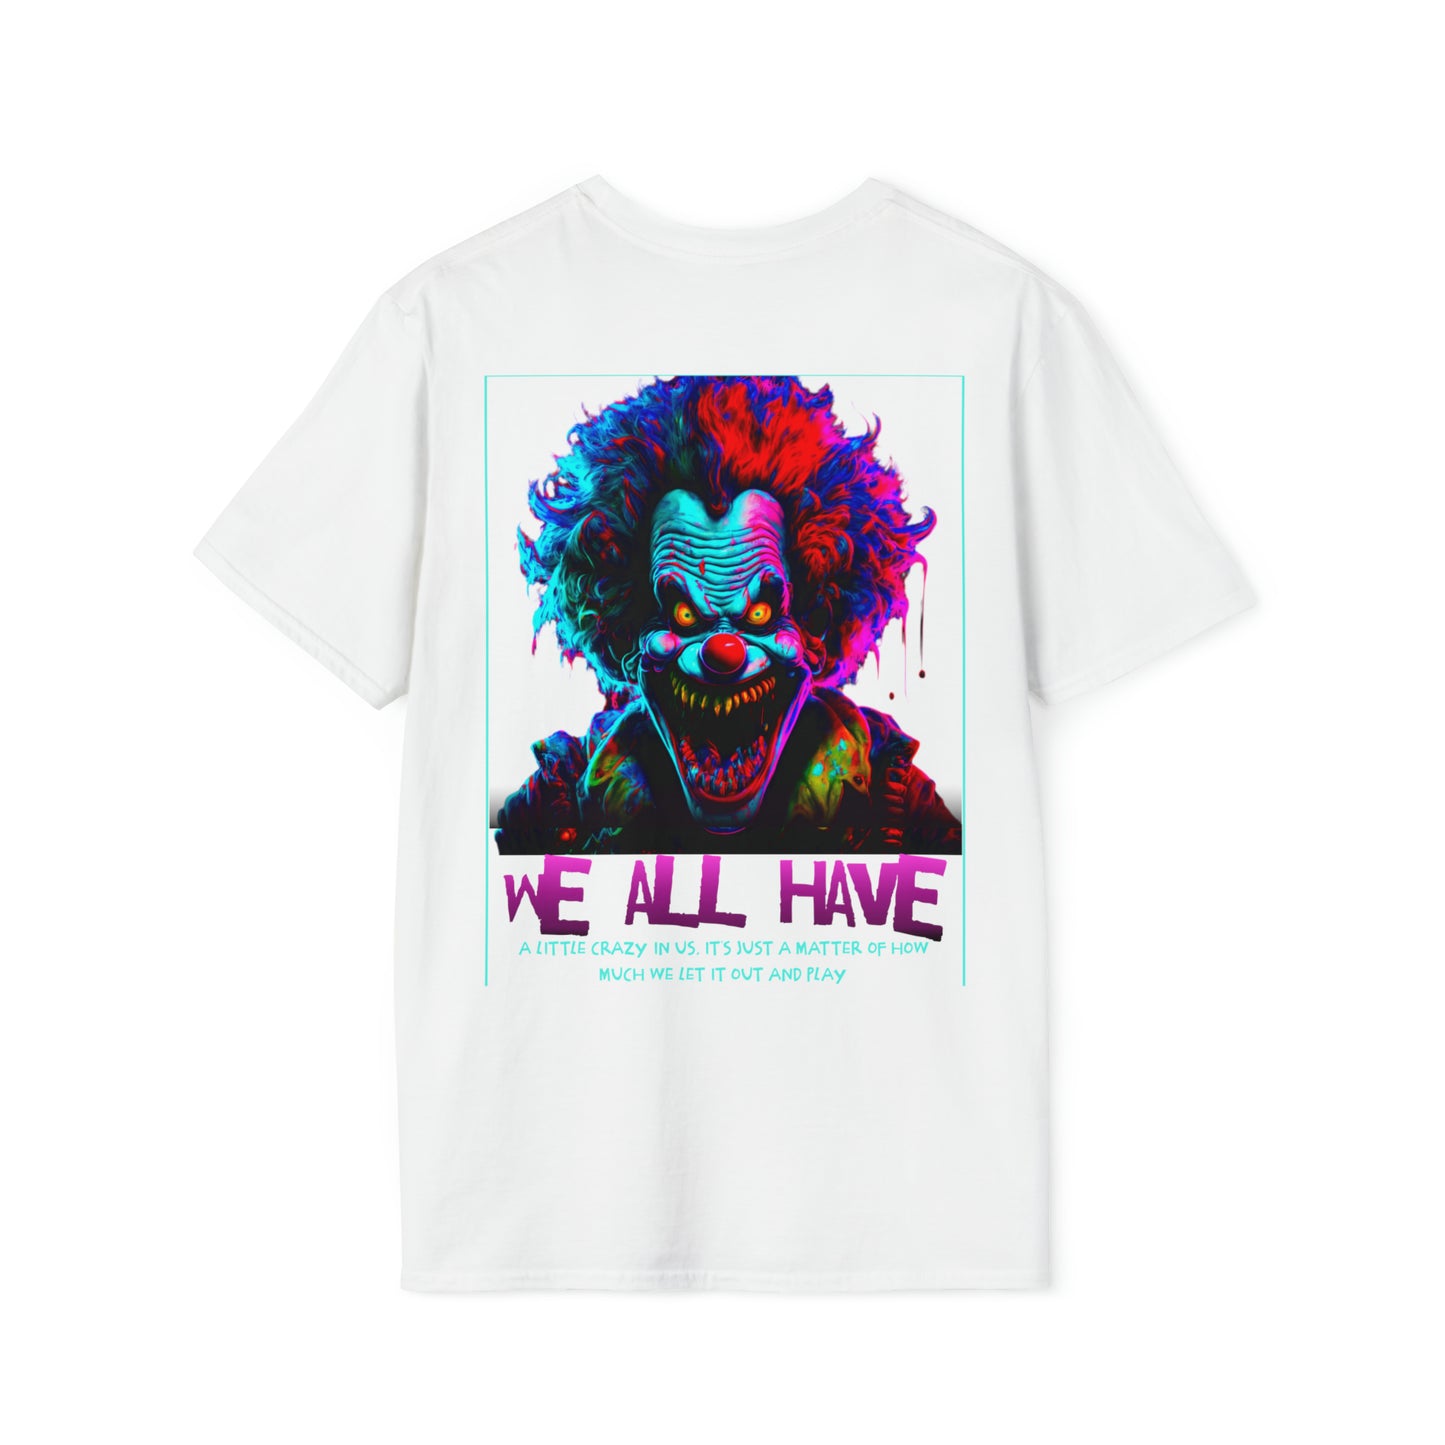 We all have a little crazy in us Unisex Softstyle T-Shirt